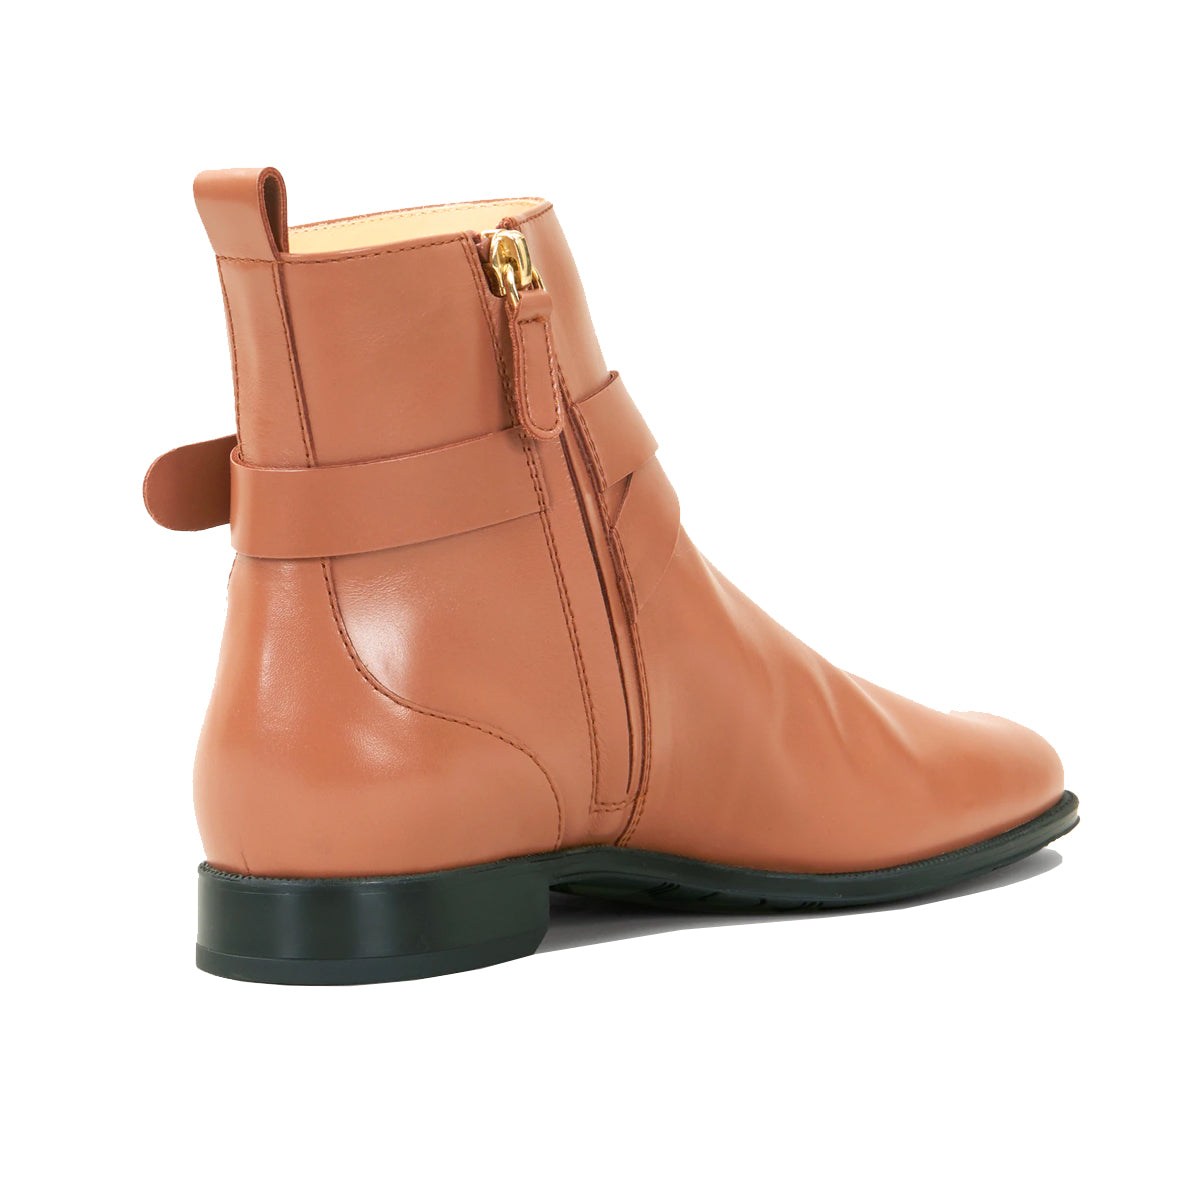 Zip Up Flat Rubber Sole Ankle Boots